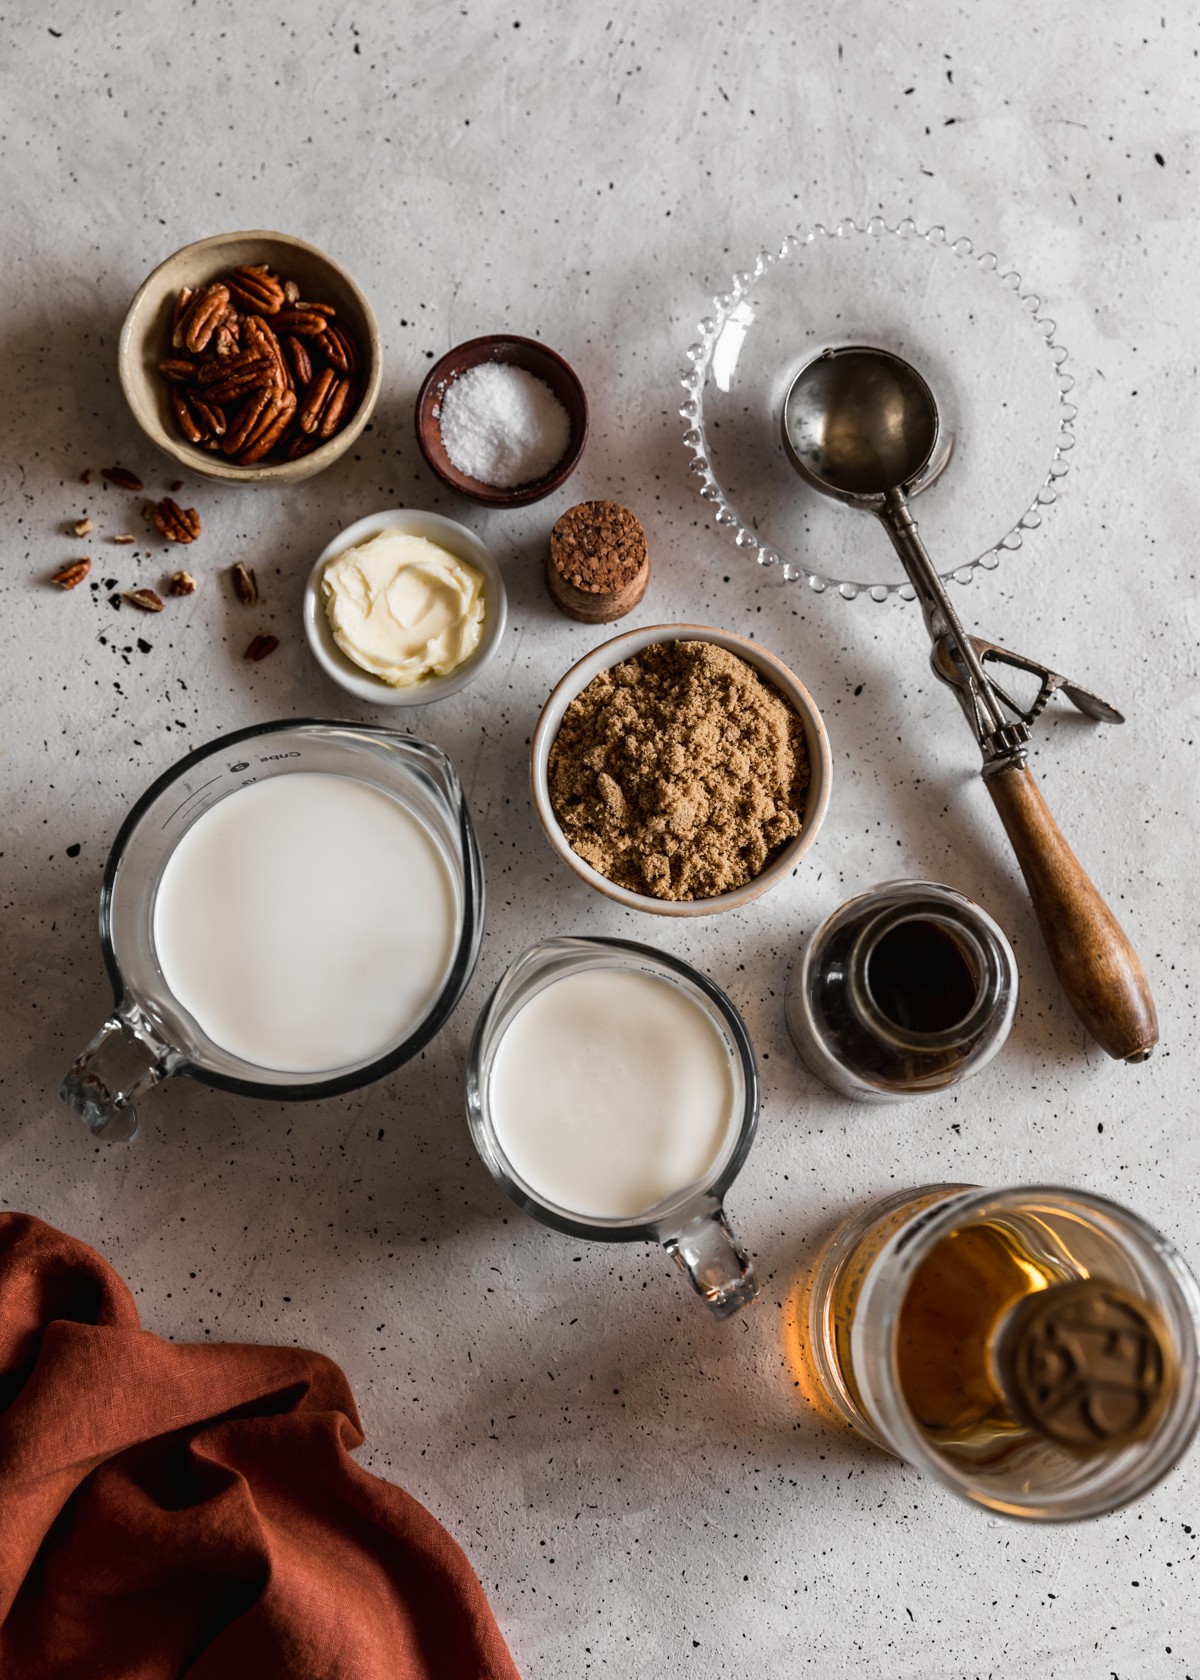 Two glass measuring cups with heavy cream and half-and half, a white bowl of brown sugar, a bottle of vanilla, a bottle of bourbon, and bowls of butter, salt, and pecans on a white speckled table. Next to the ingredients is a vintage ice cream scoop and dark orange linen.